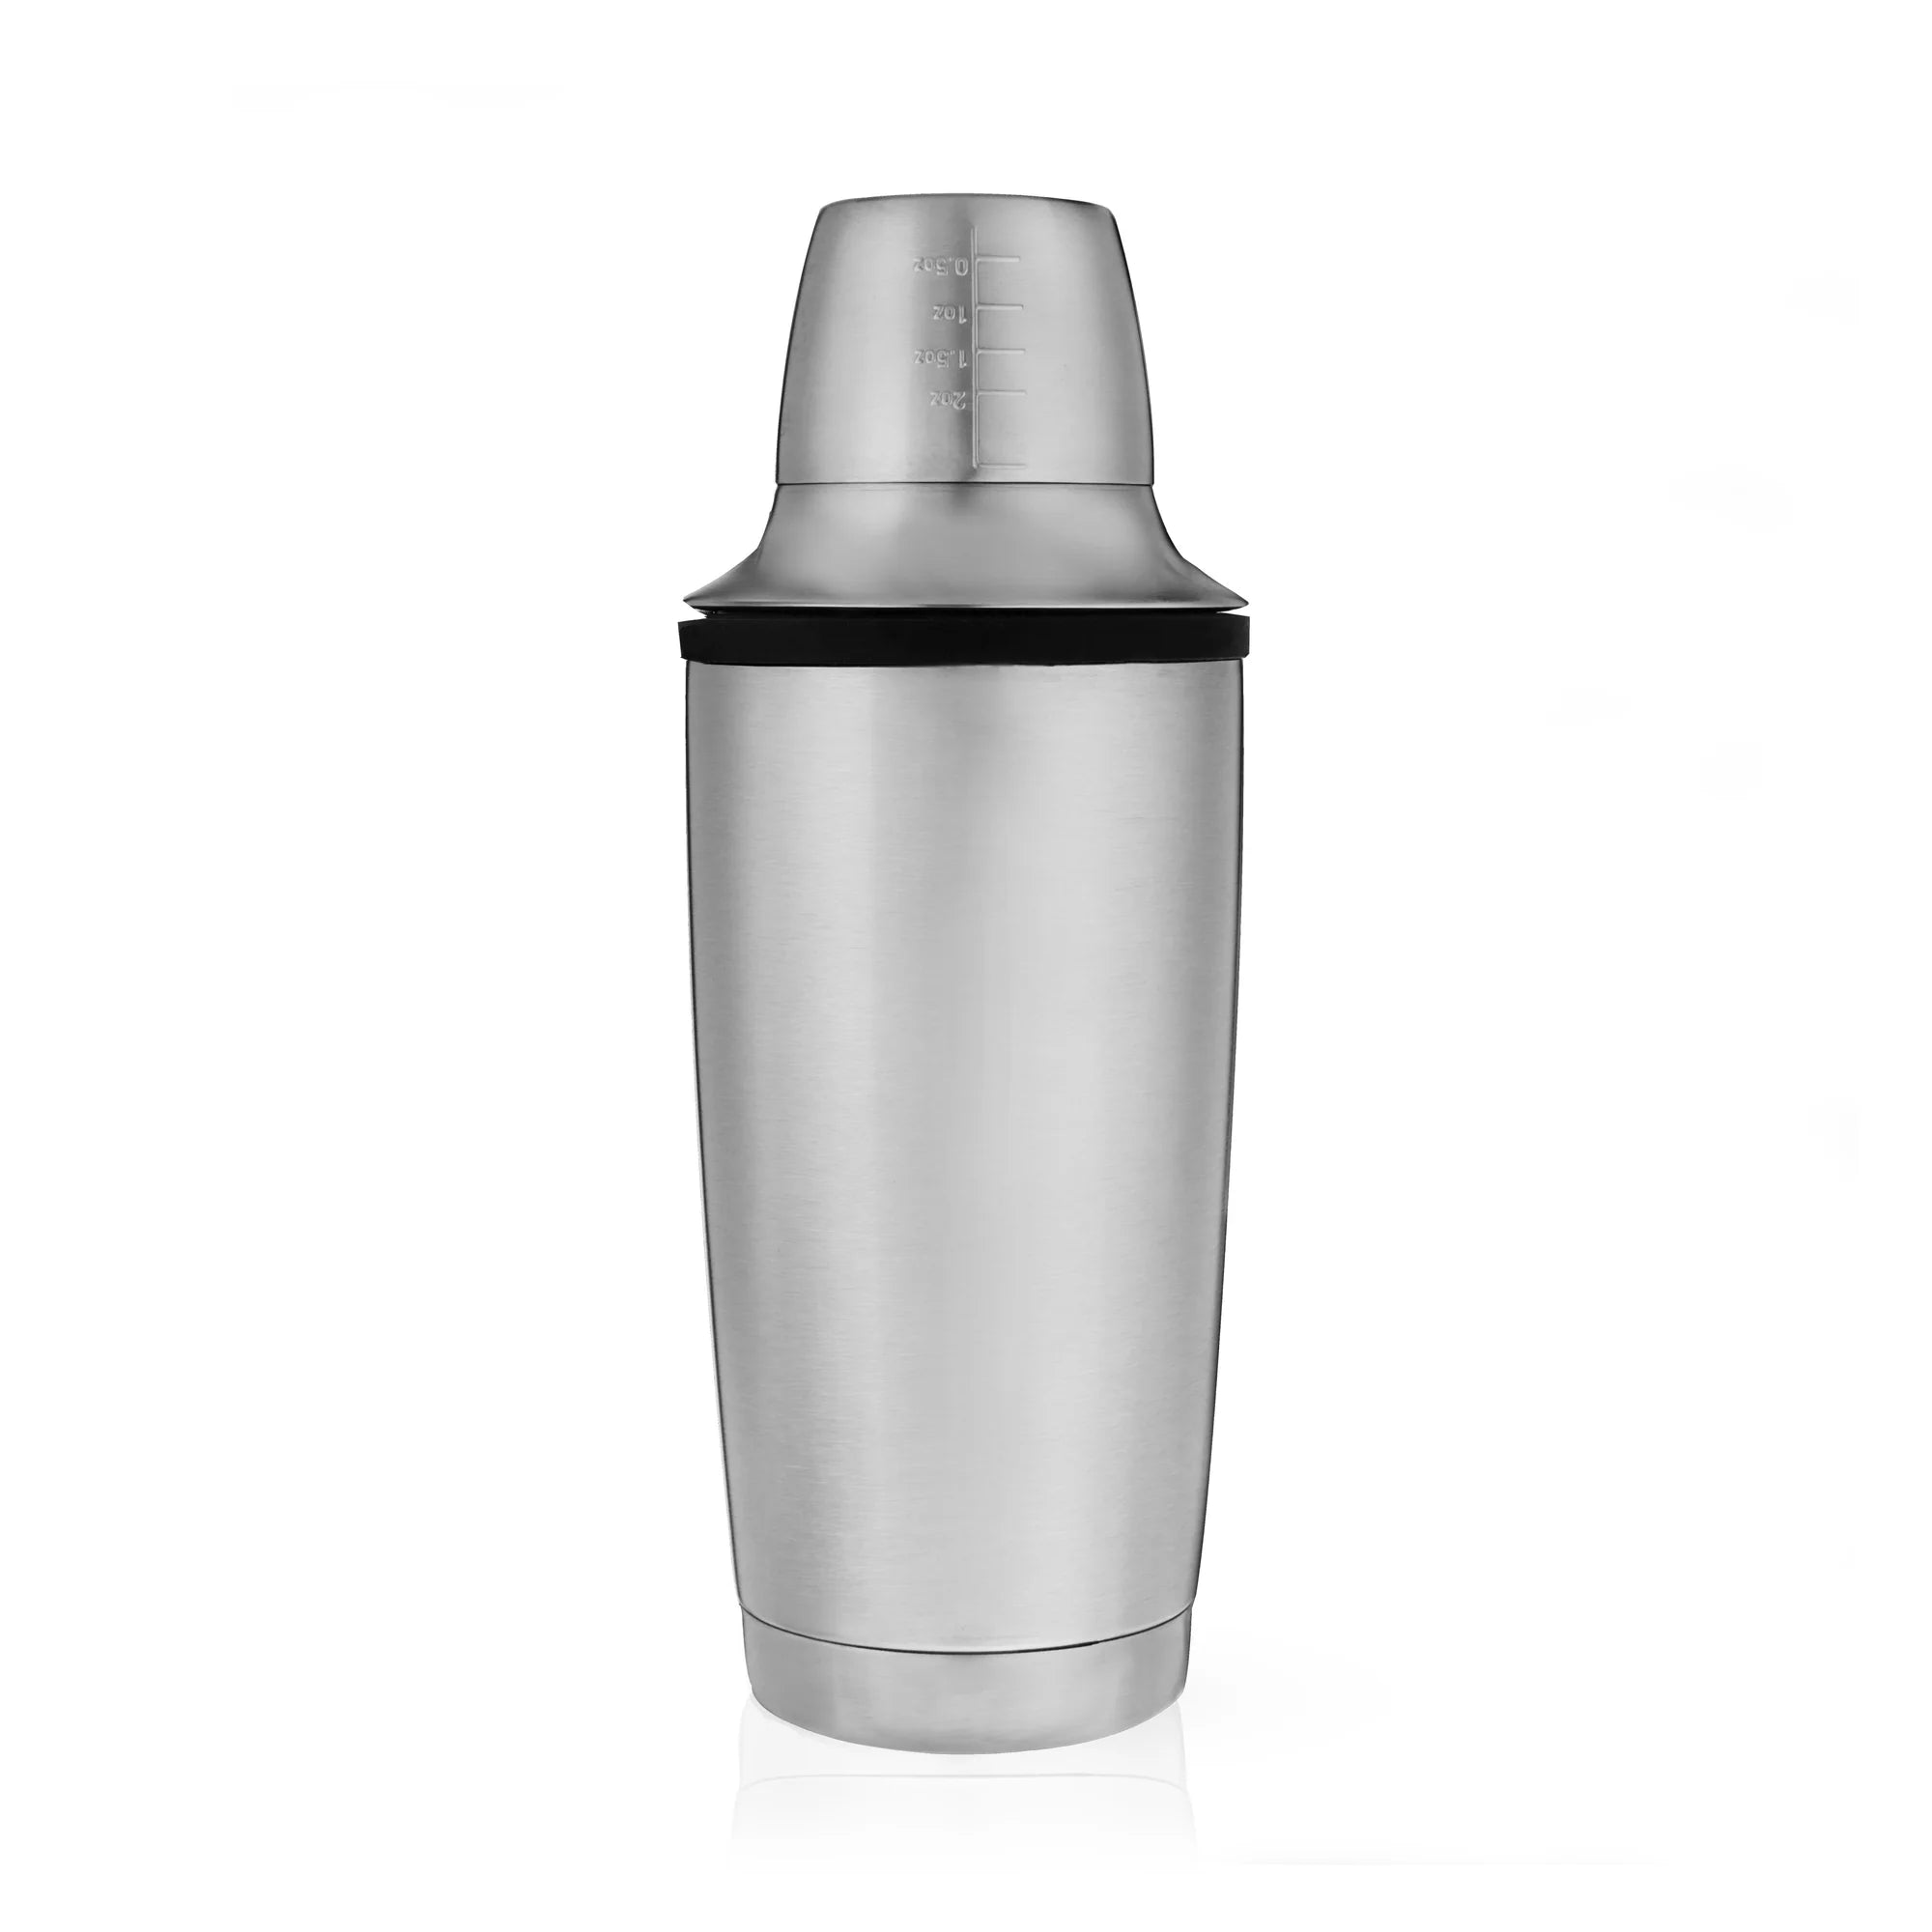 YETI Shaker 20 oz. Rambler Cocktail Shaker Stainless Steel NEW IN BOX -  household items - by owner - housewares sale 